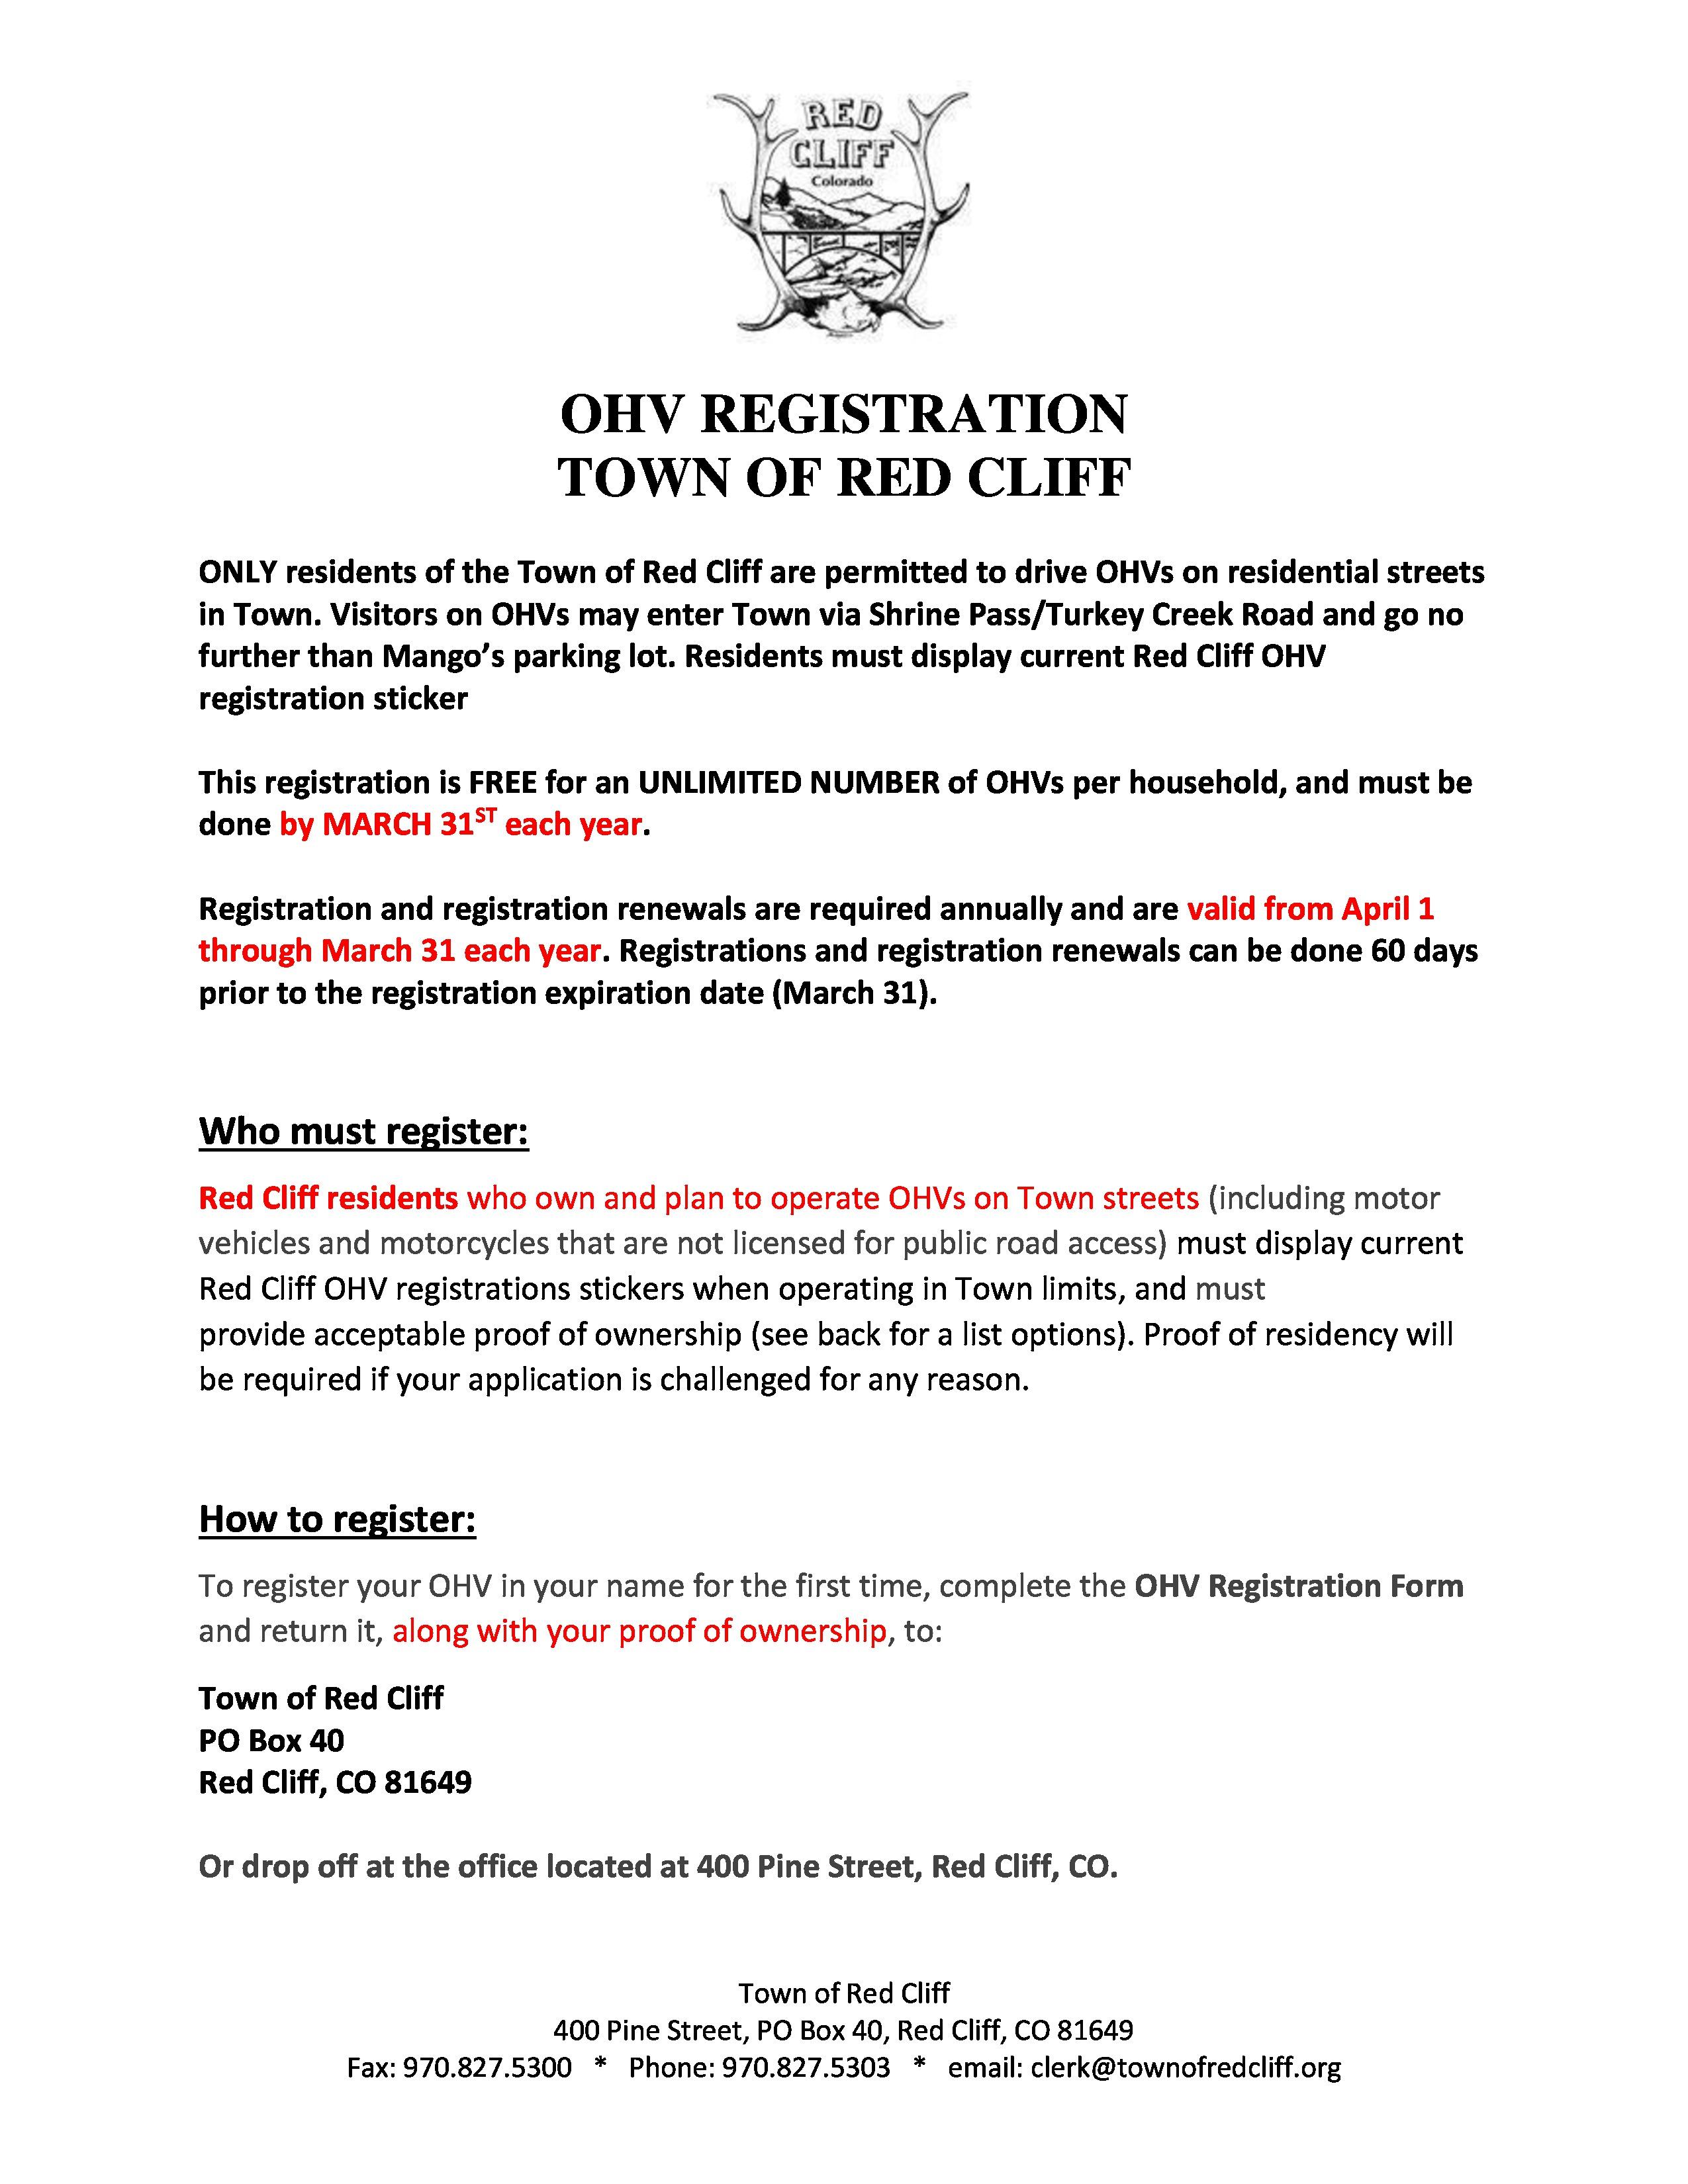 Page 1 of the OHV registration form